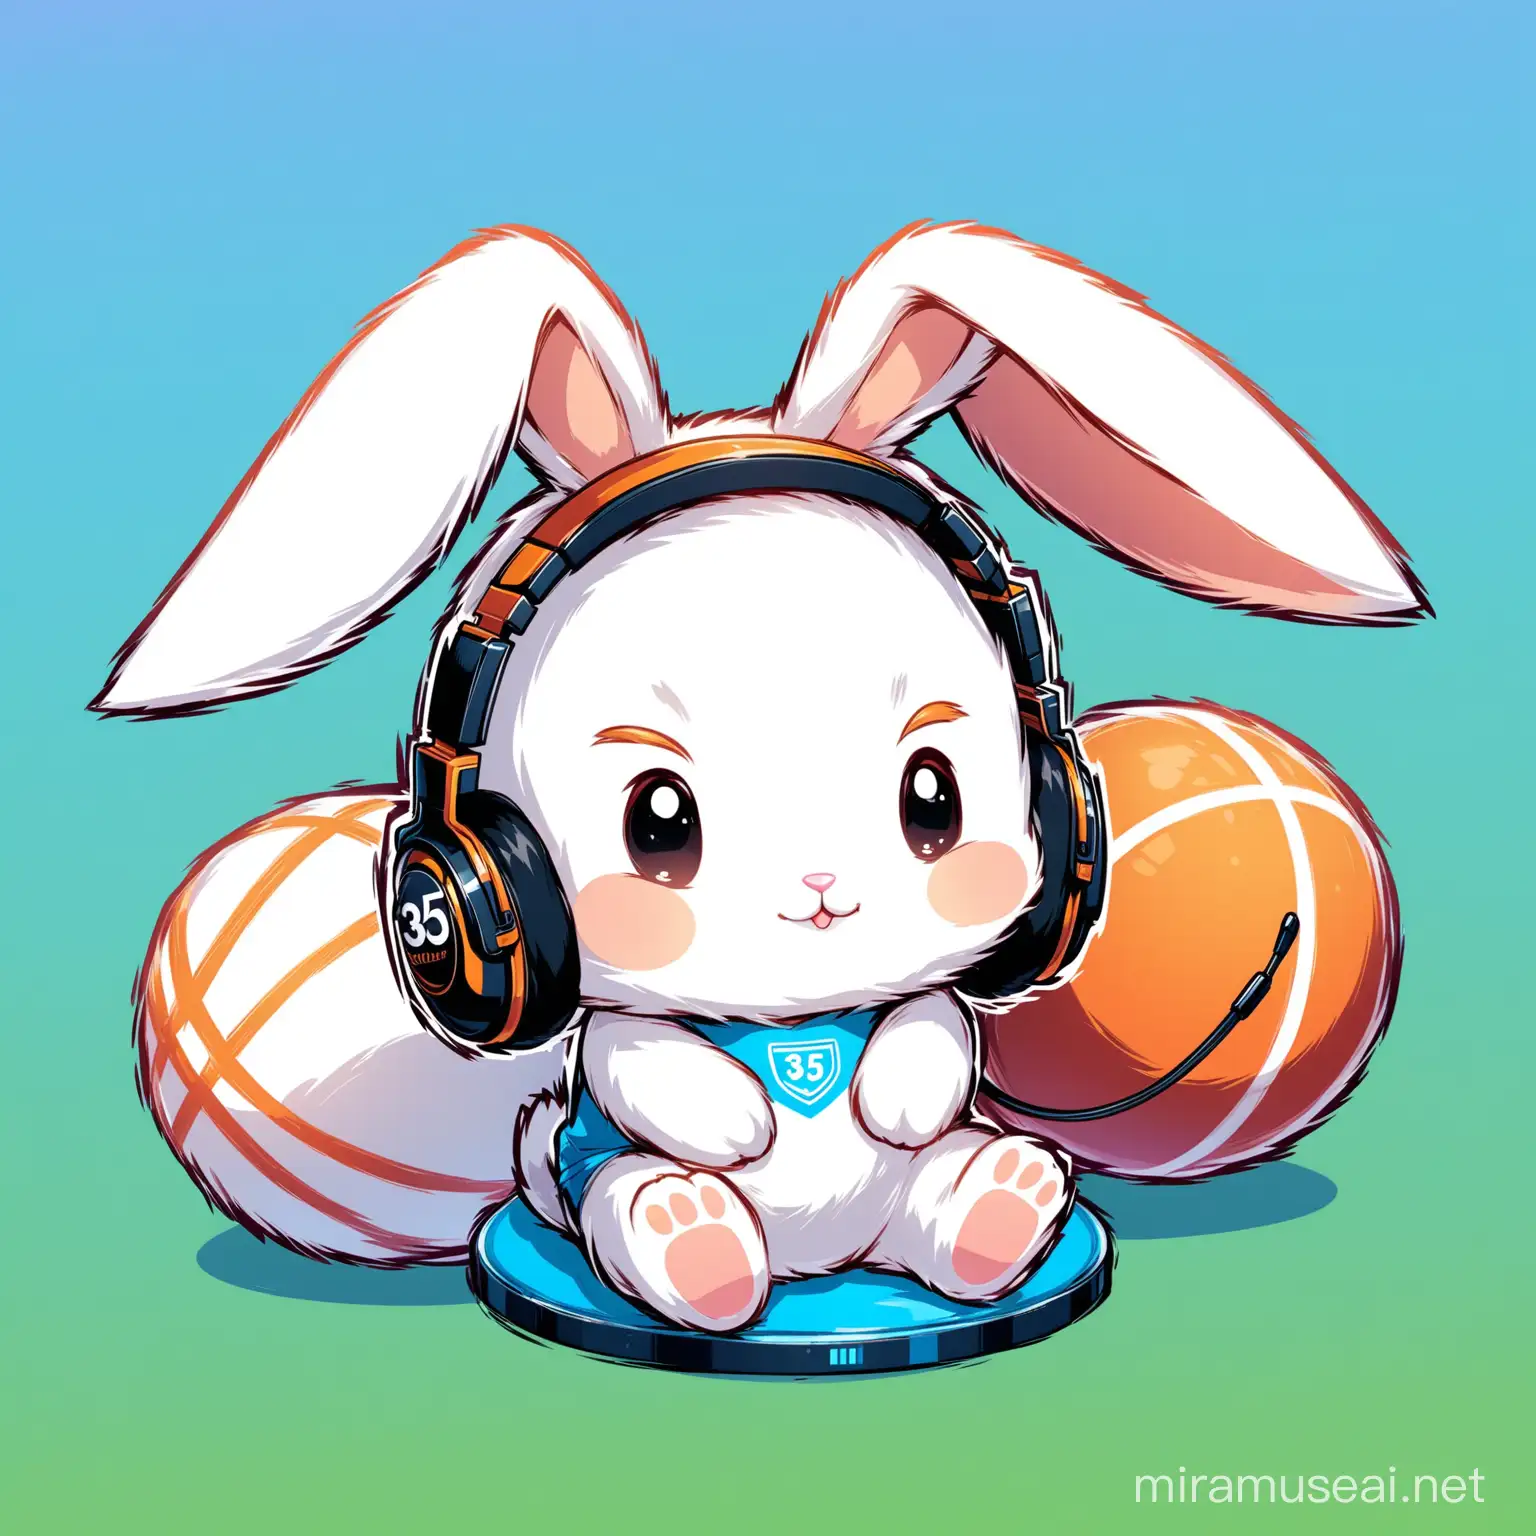 logo, bunny, mascot, sport, have full body bunny, sit,  wear headphone, caster, 35 degree inclined surface